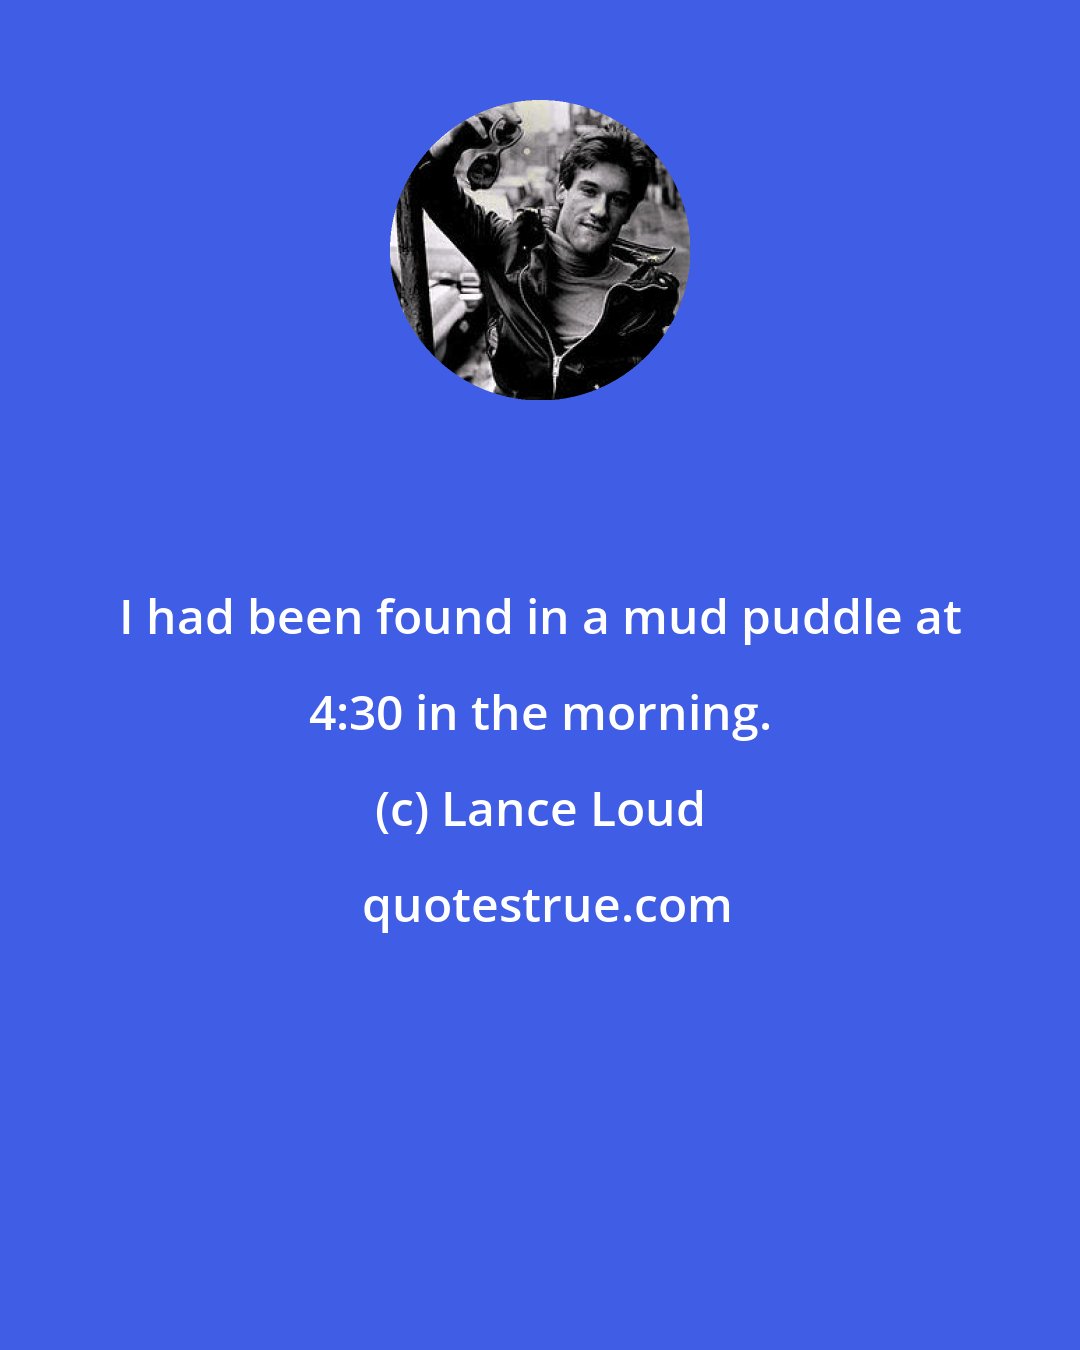 Lance Loud: I had been found in a mud puddle at 4:30 in the morning.